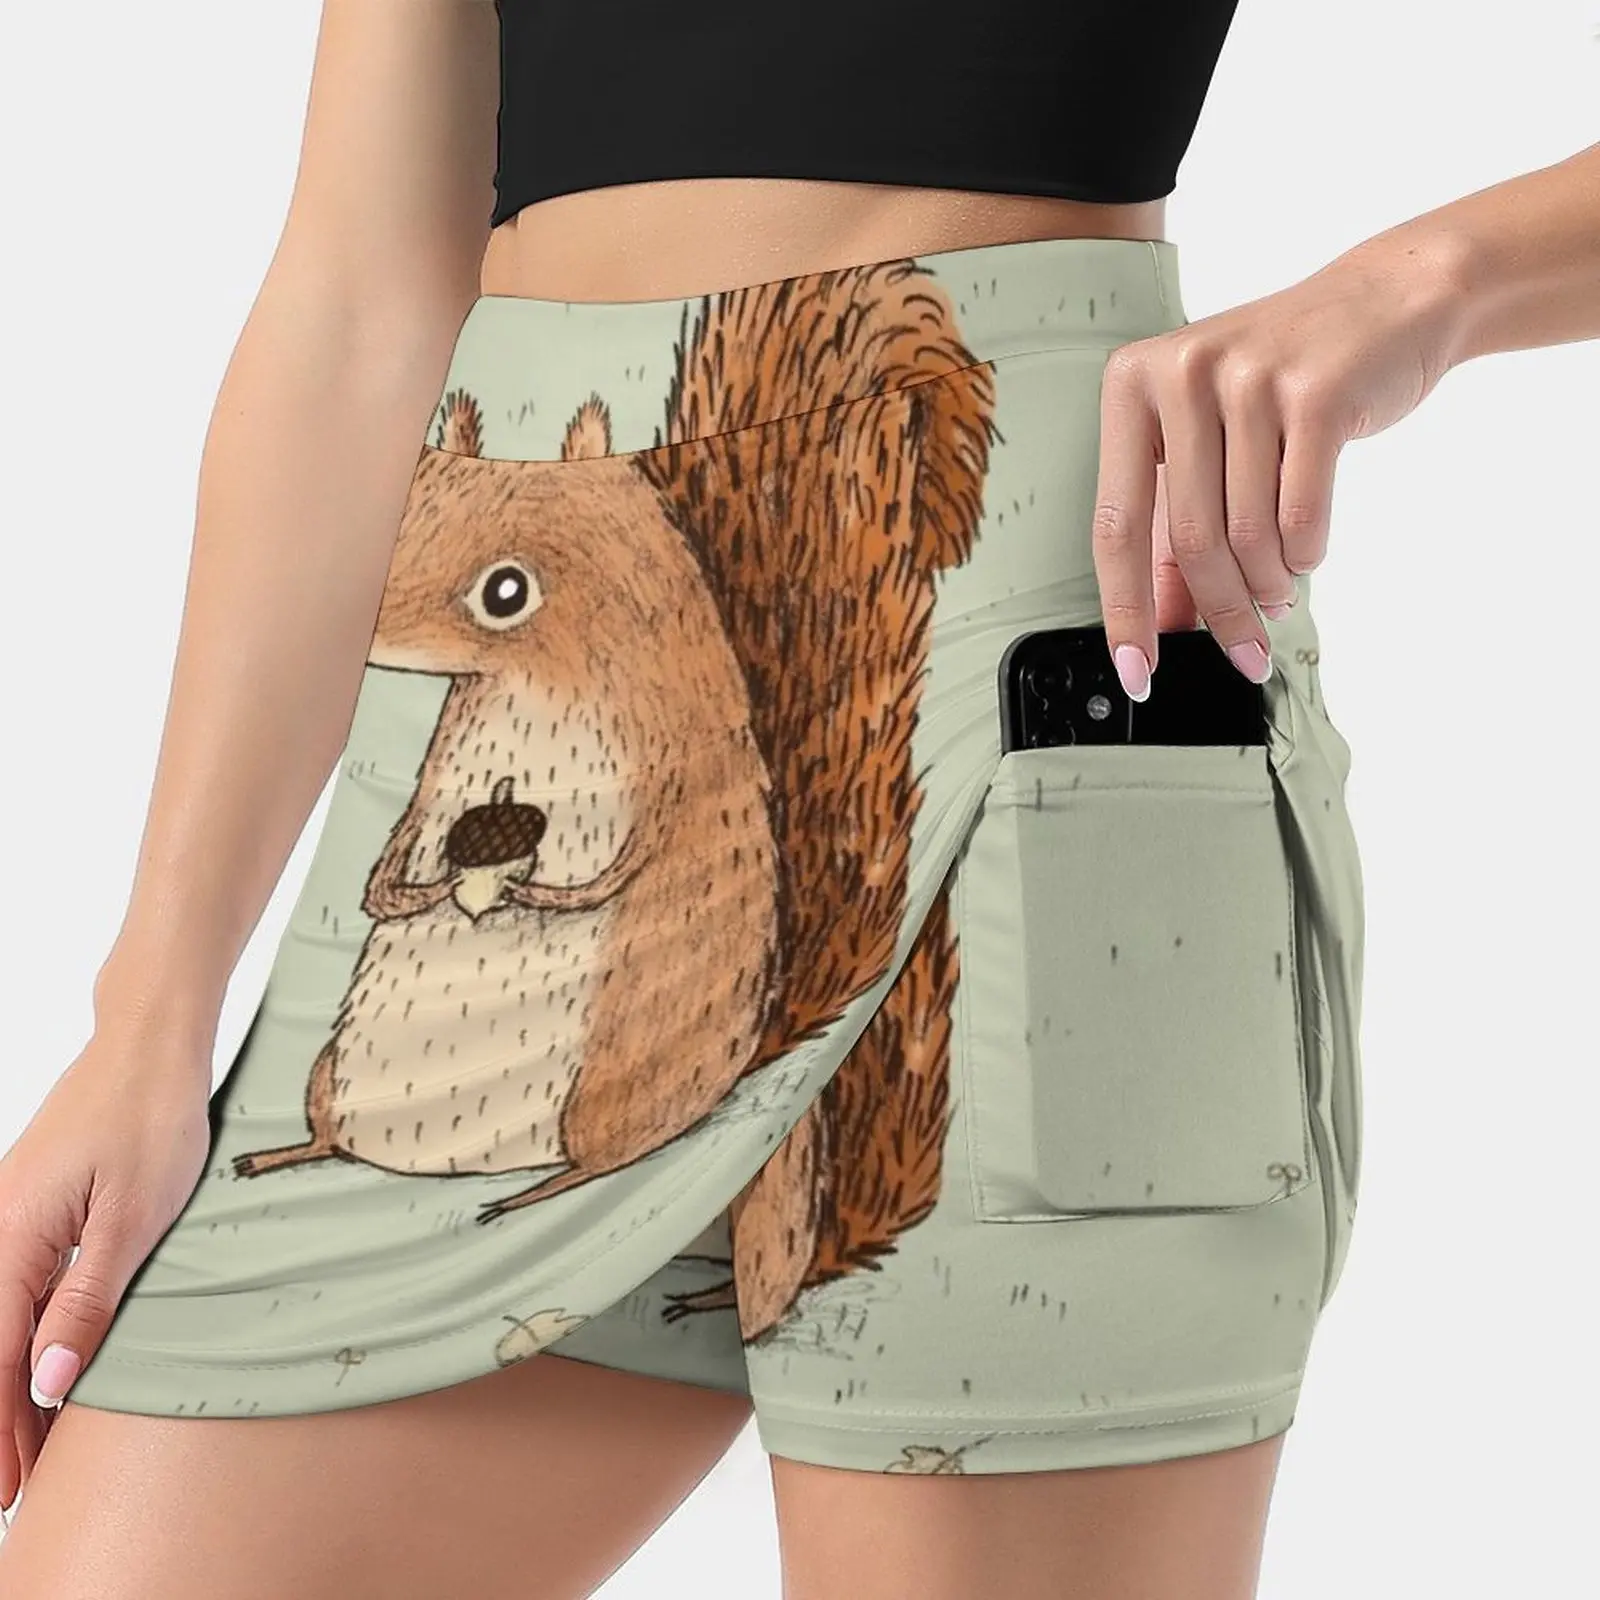 

Sarah The Squirrel Women's skirt Aesthetic skirts New Fashion Short Skirts Sarah Squirrel Red Cute Leaf Creature Critter Grass